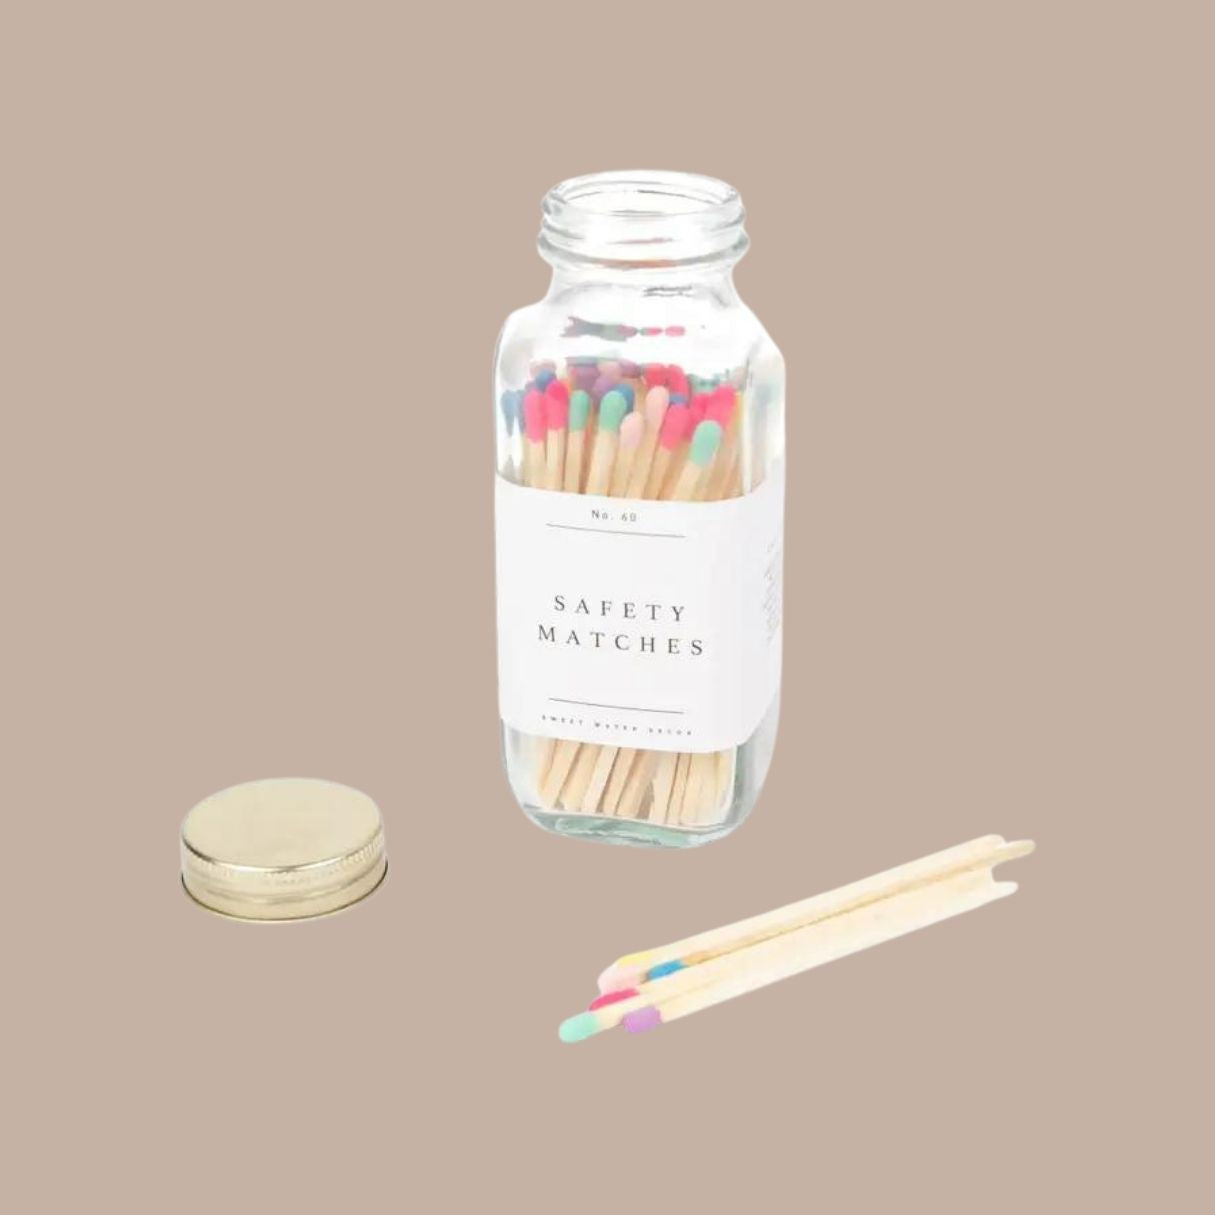 Clear Jar of Colorful Matches - Sweet Water Decor - Box Builder Item - KINSHIP GIFT - birthday, birthday gift, housewarming, housewarming gift, LDT:GW:RESTRICT, Sweet Water Decor - Pittsburgh - gift - boxes - gift - baskets - corporate - gifts - holiday - gifts